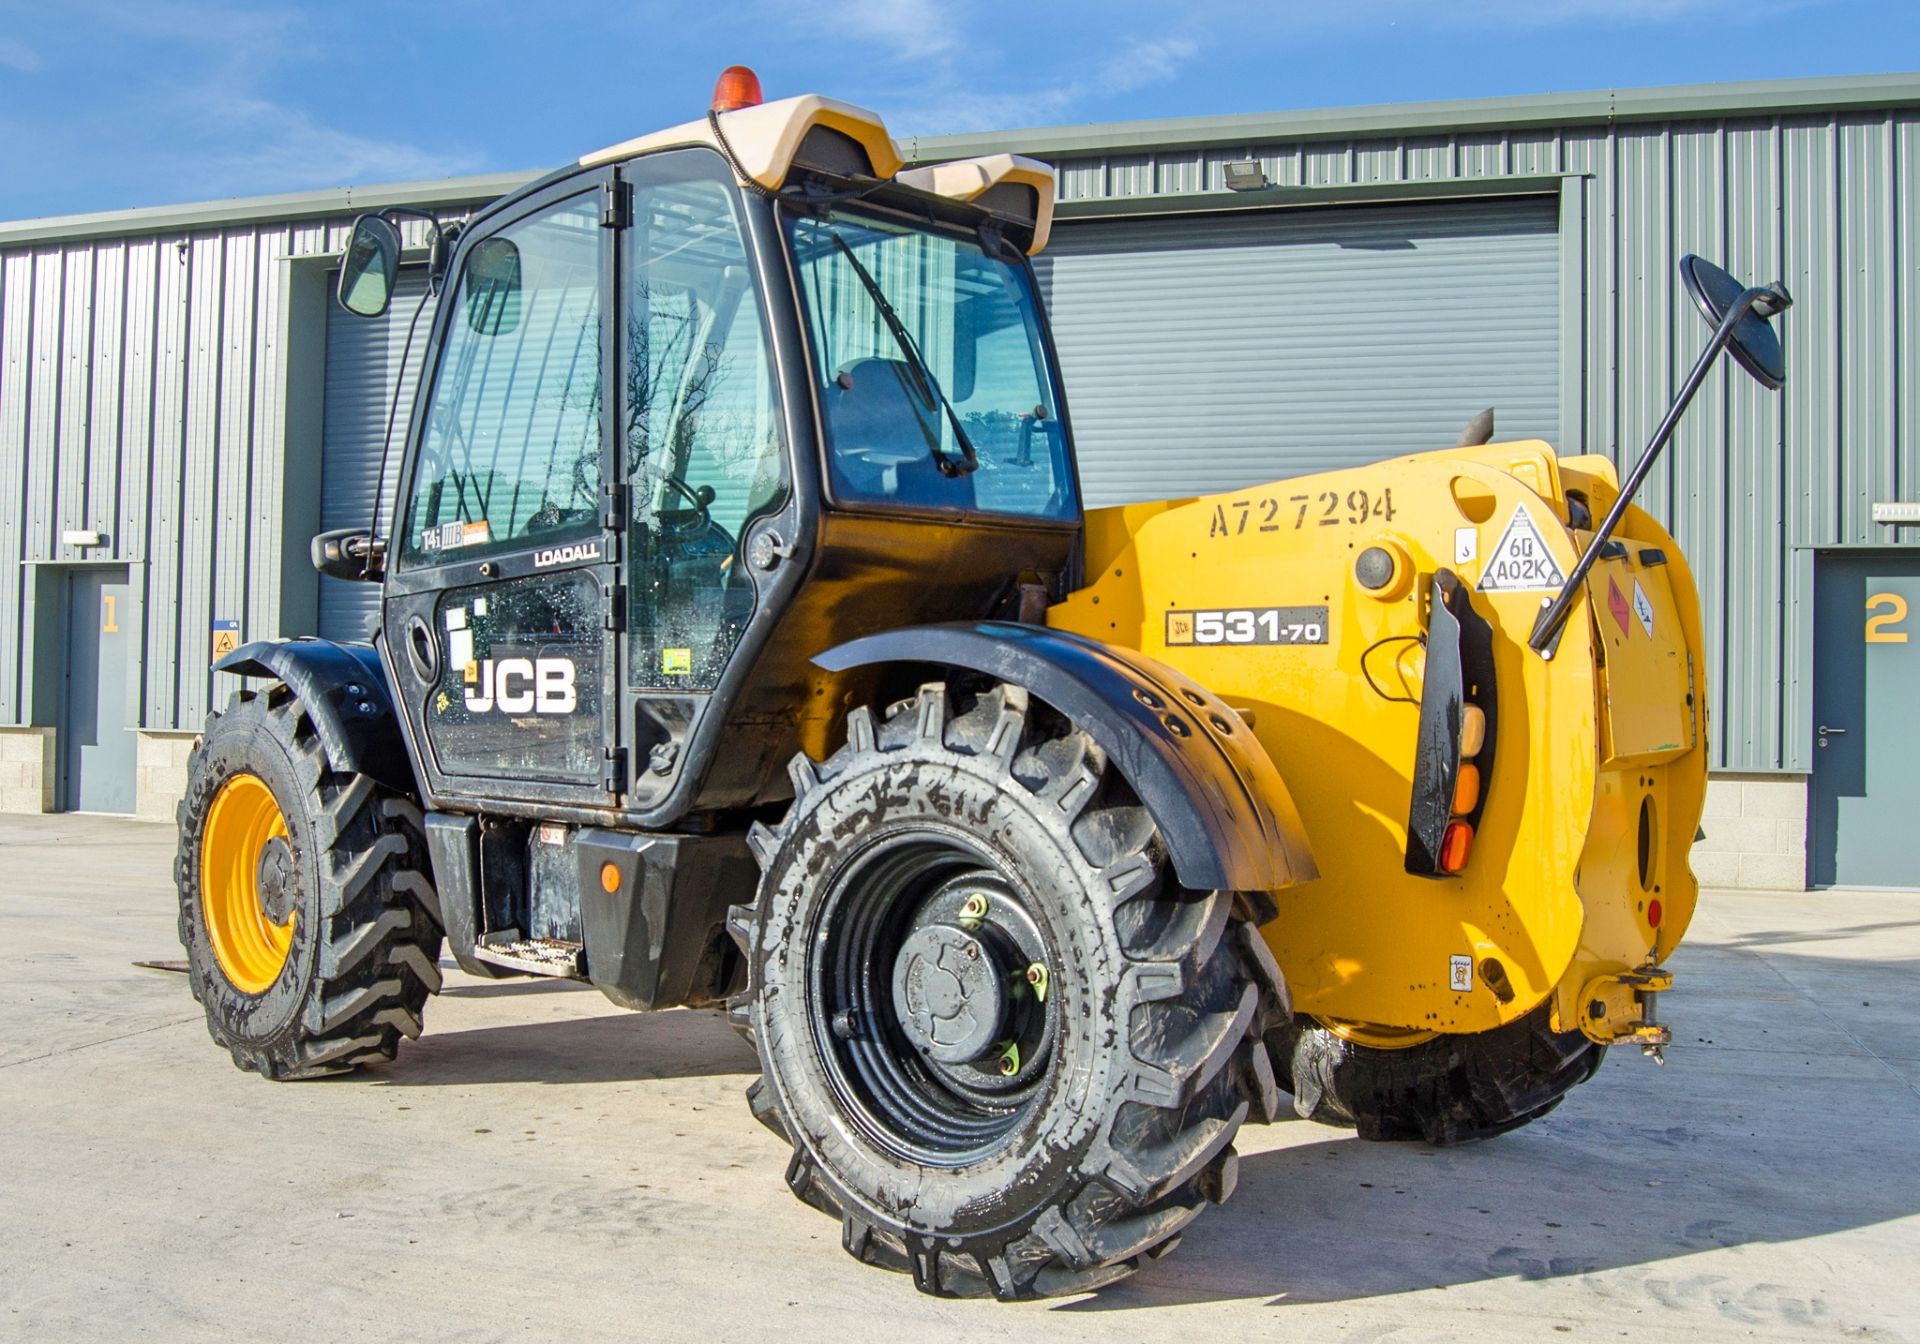 JCB 531-70 7 metre telescopic handler Year: 2016 S/N: 2461247 Recorded Hours: 2470 A727294 - Image 3 of 23